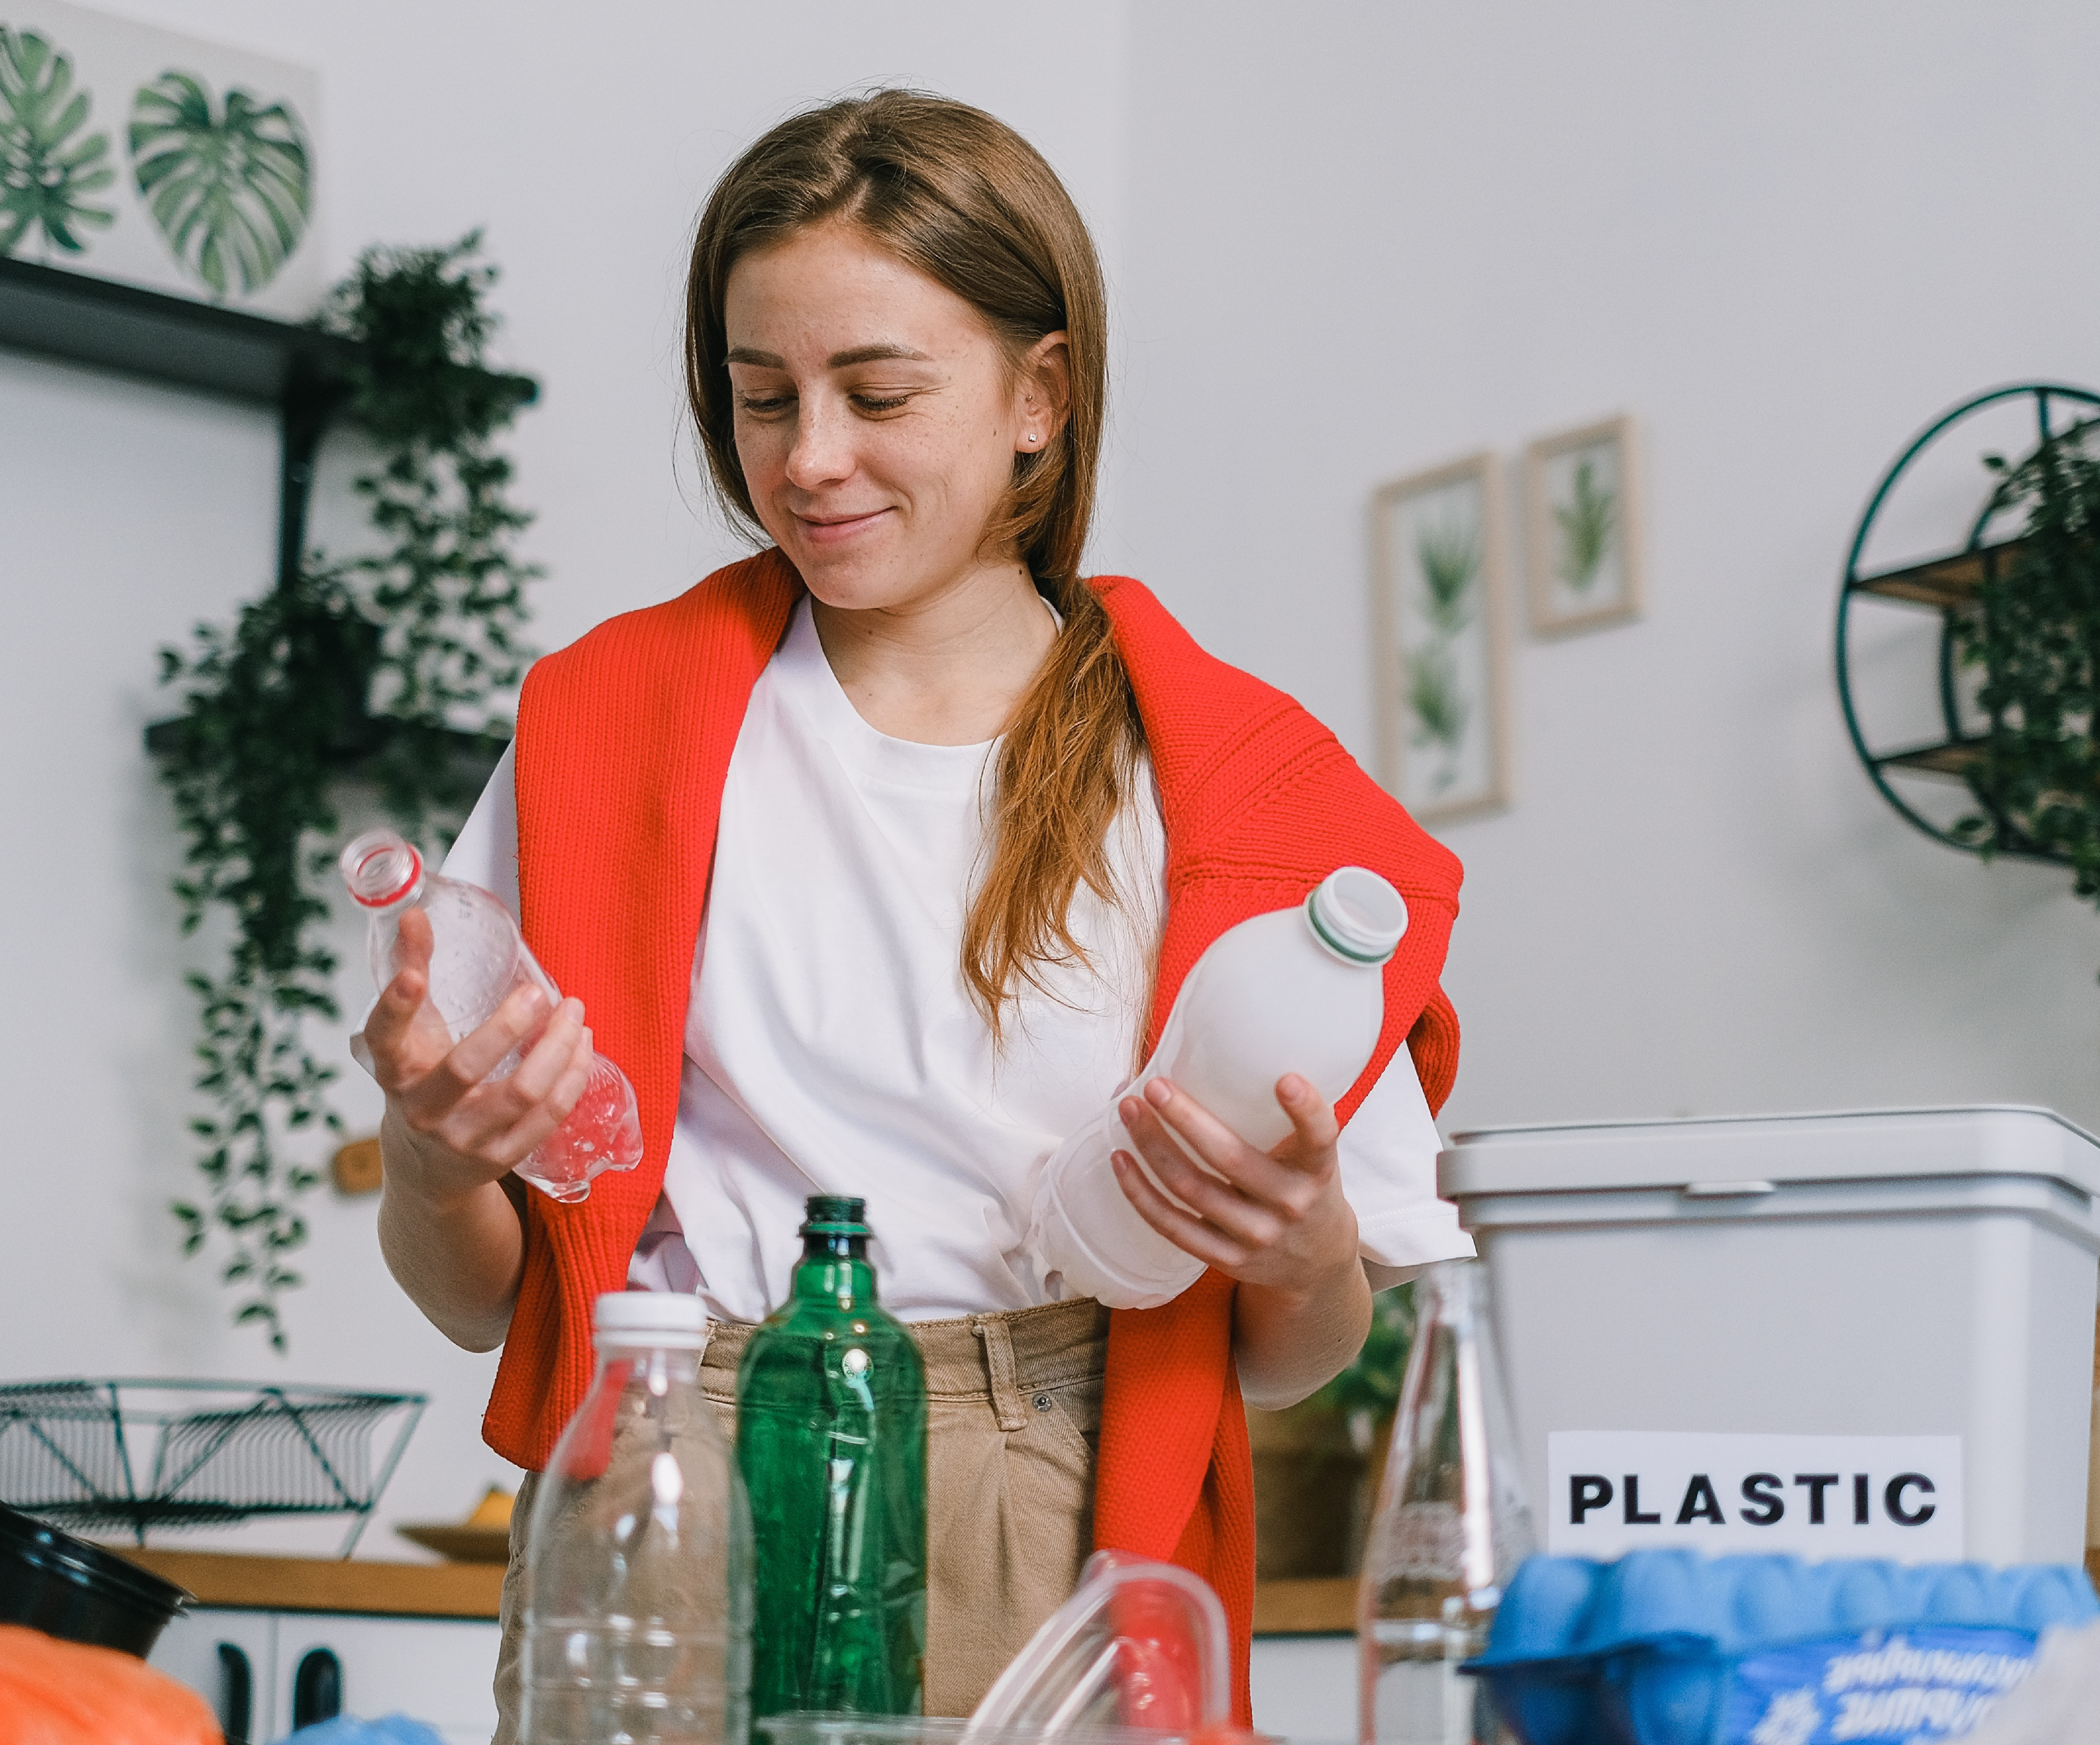 Are you looking to eliminate plastic from your life? Discover practical ways to reduce your plastic use and start living your best plastic-free life.